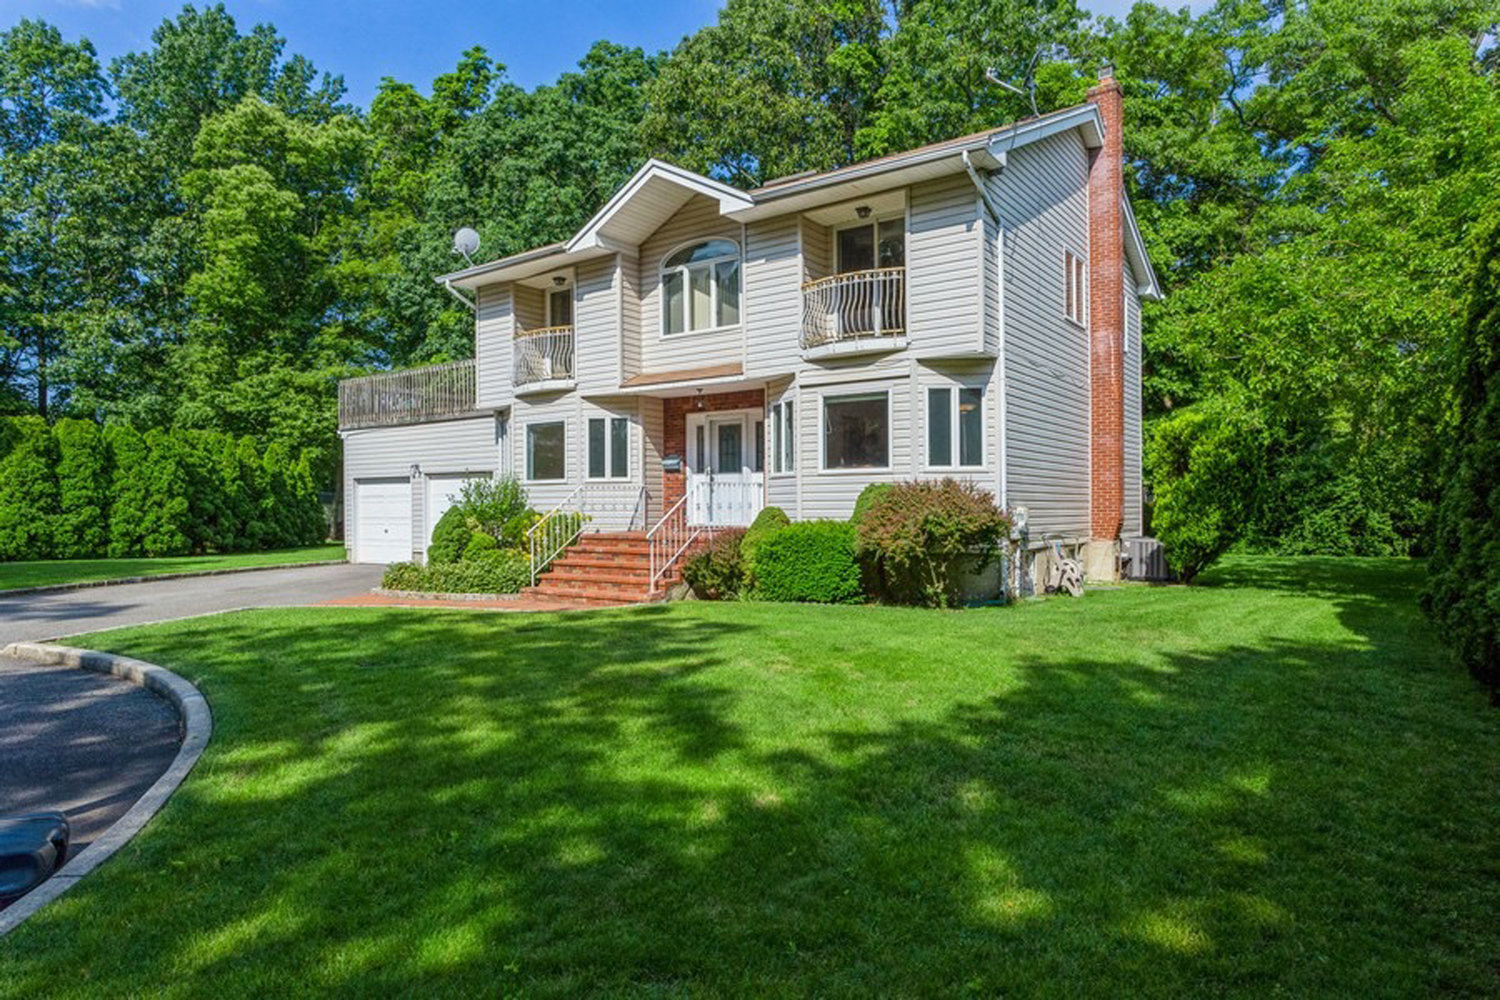 As the weather heats up, so does the real estate market. Local agents say they believe that many homes will sell, such as this one on Bedell Terrace in West Hempstead.